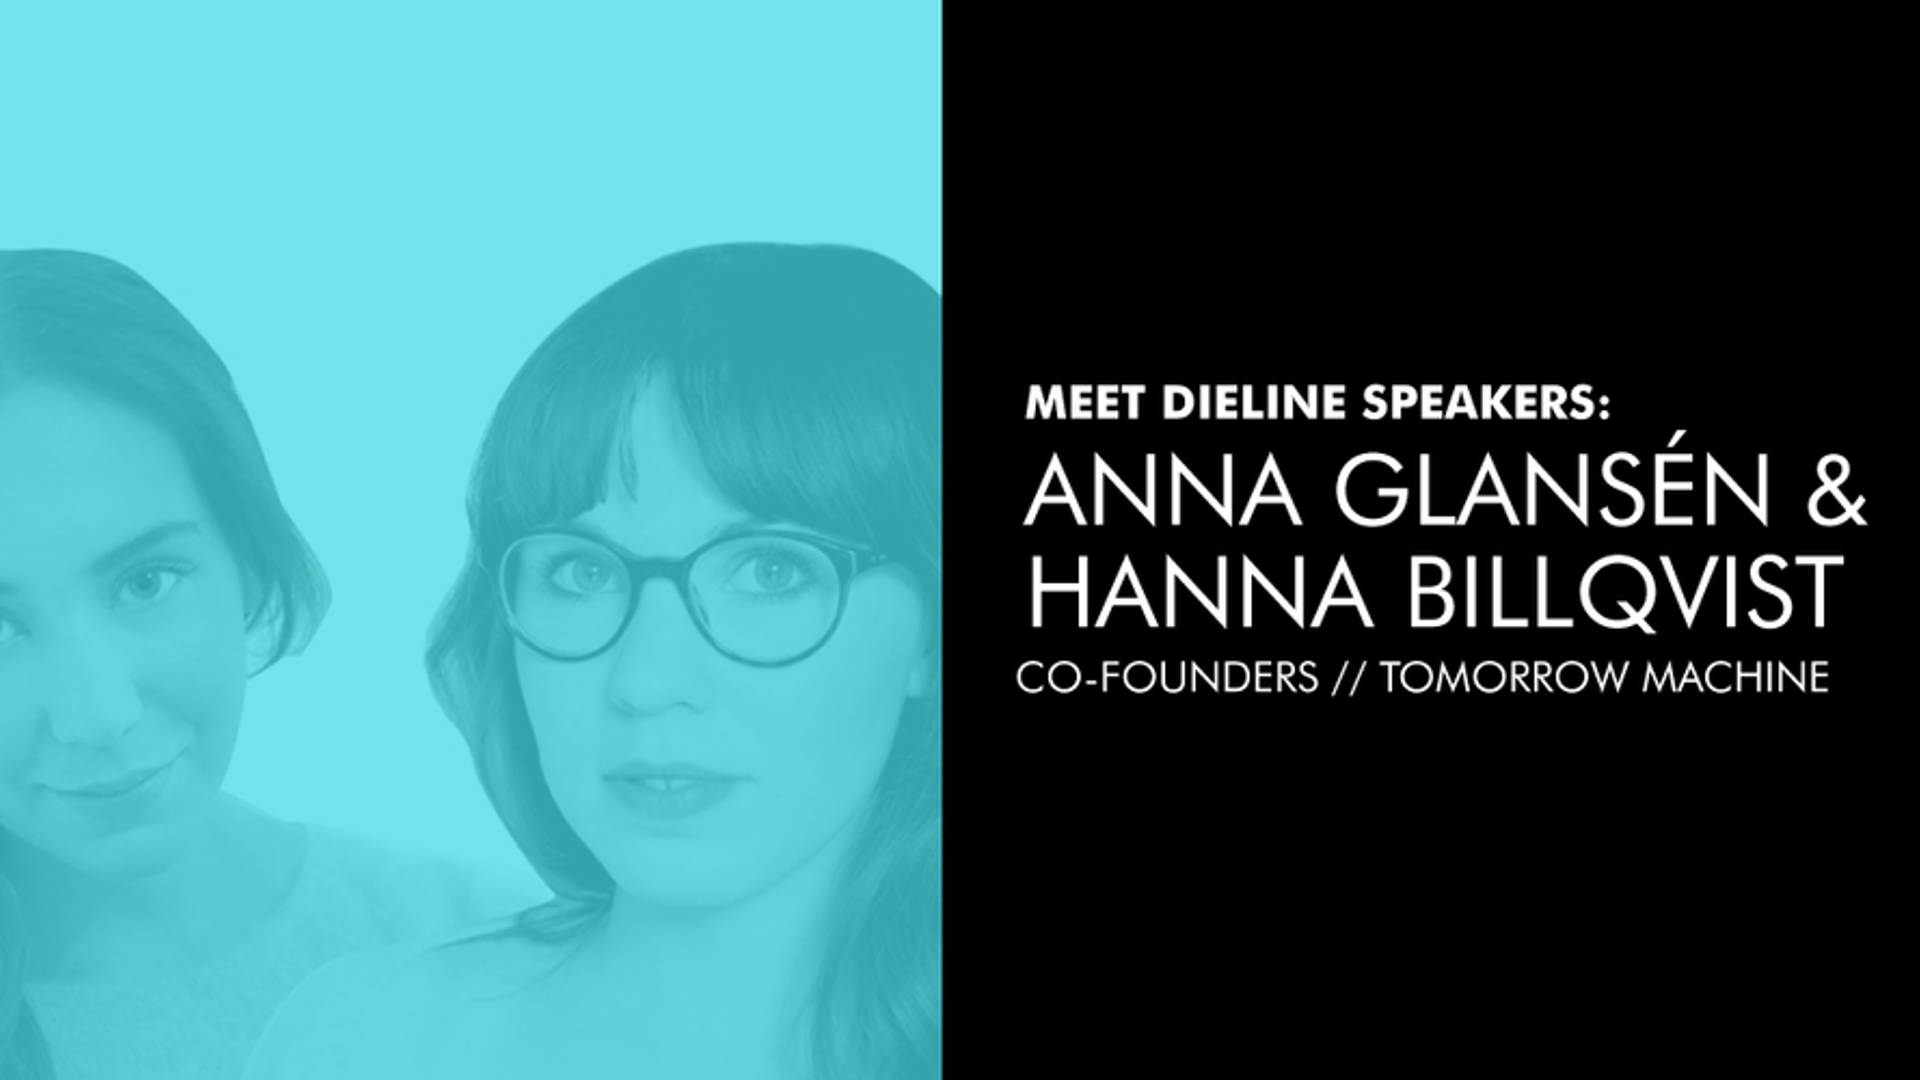 Featured image for Meet Hanna & Anna - The Dieline Speakers @ HOW Design Live